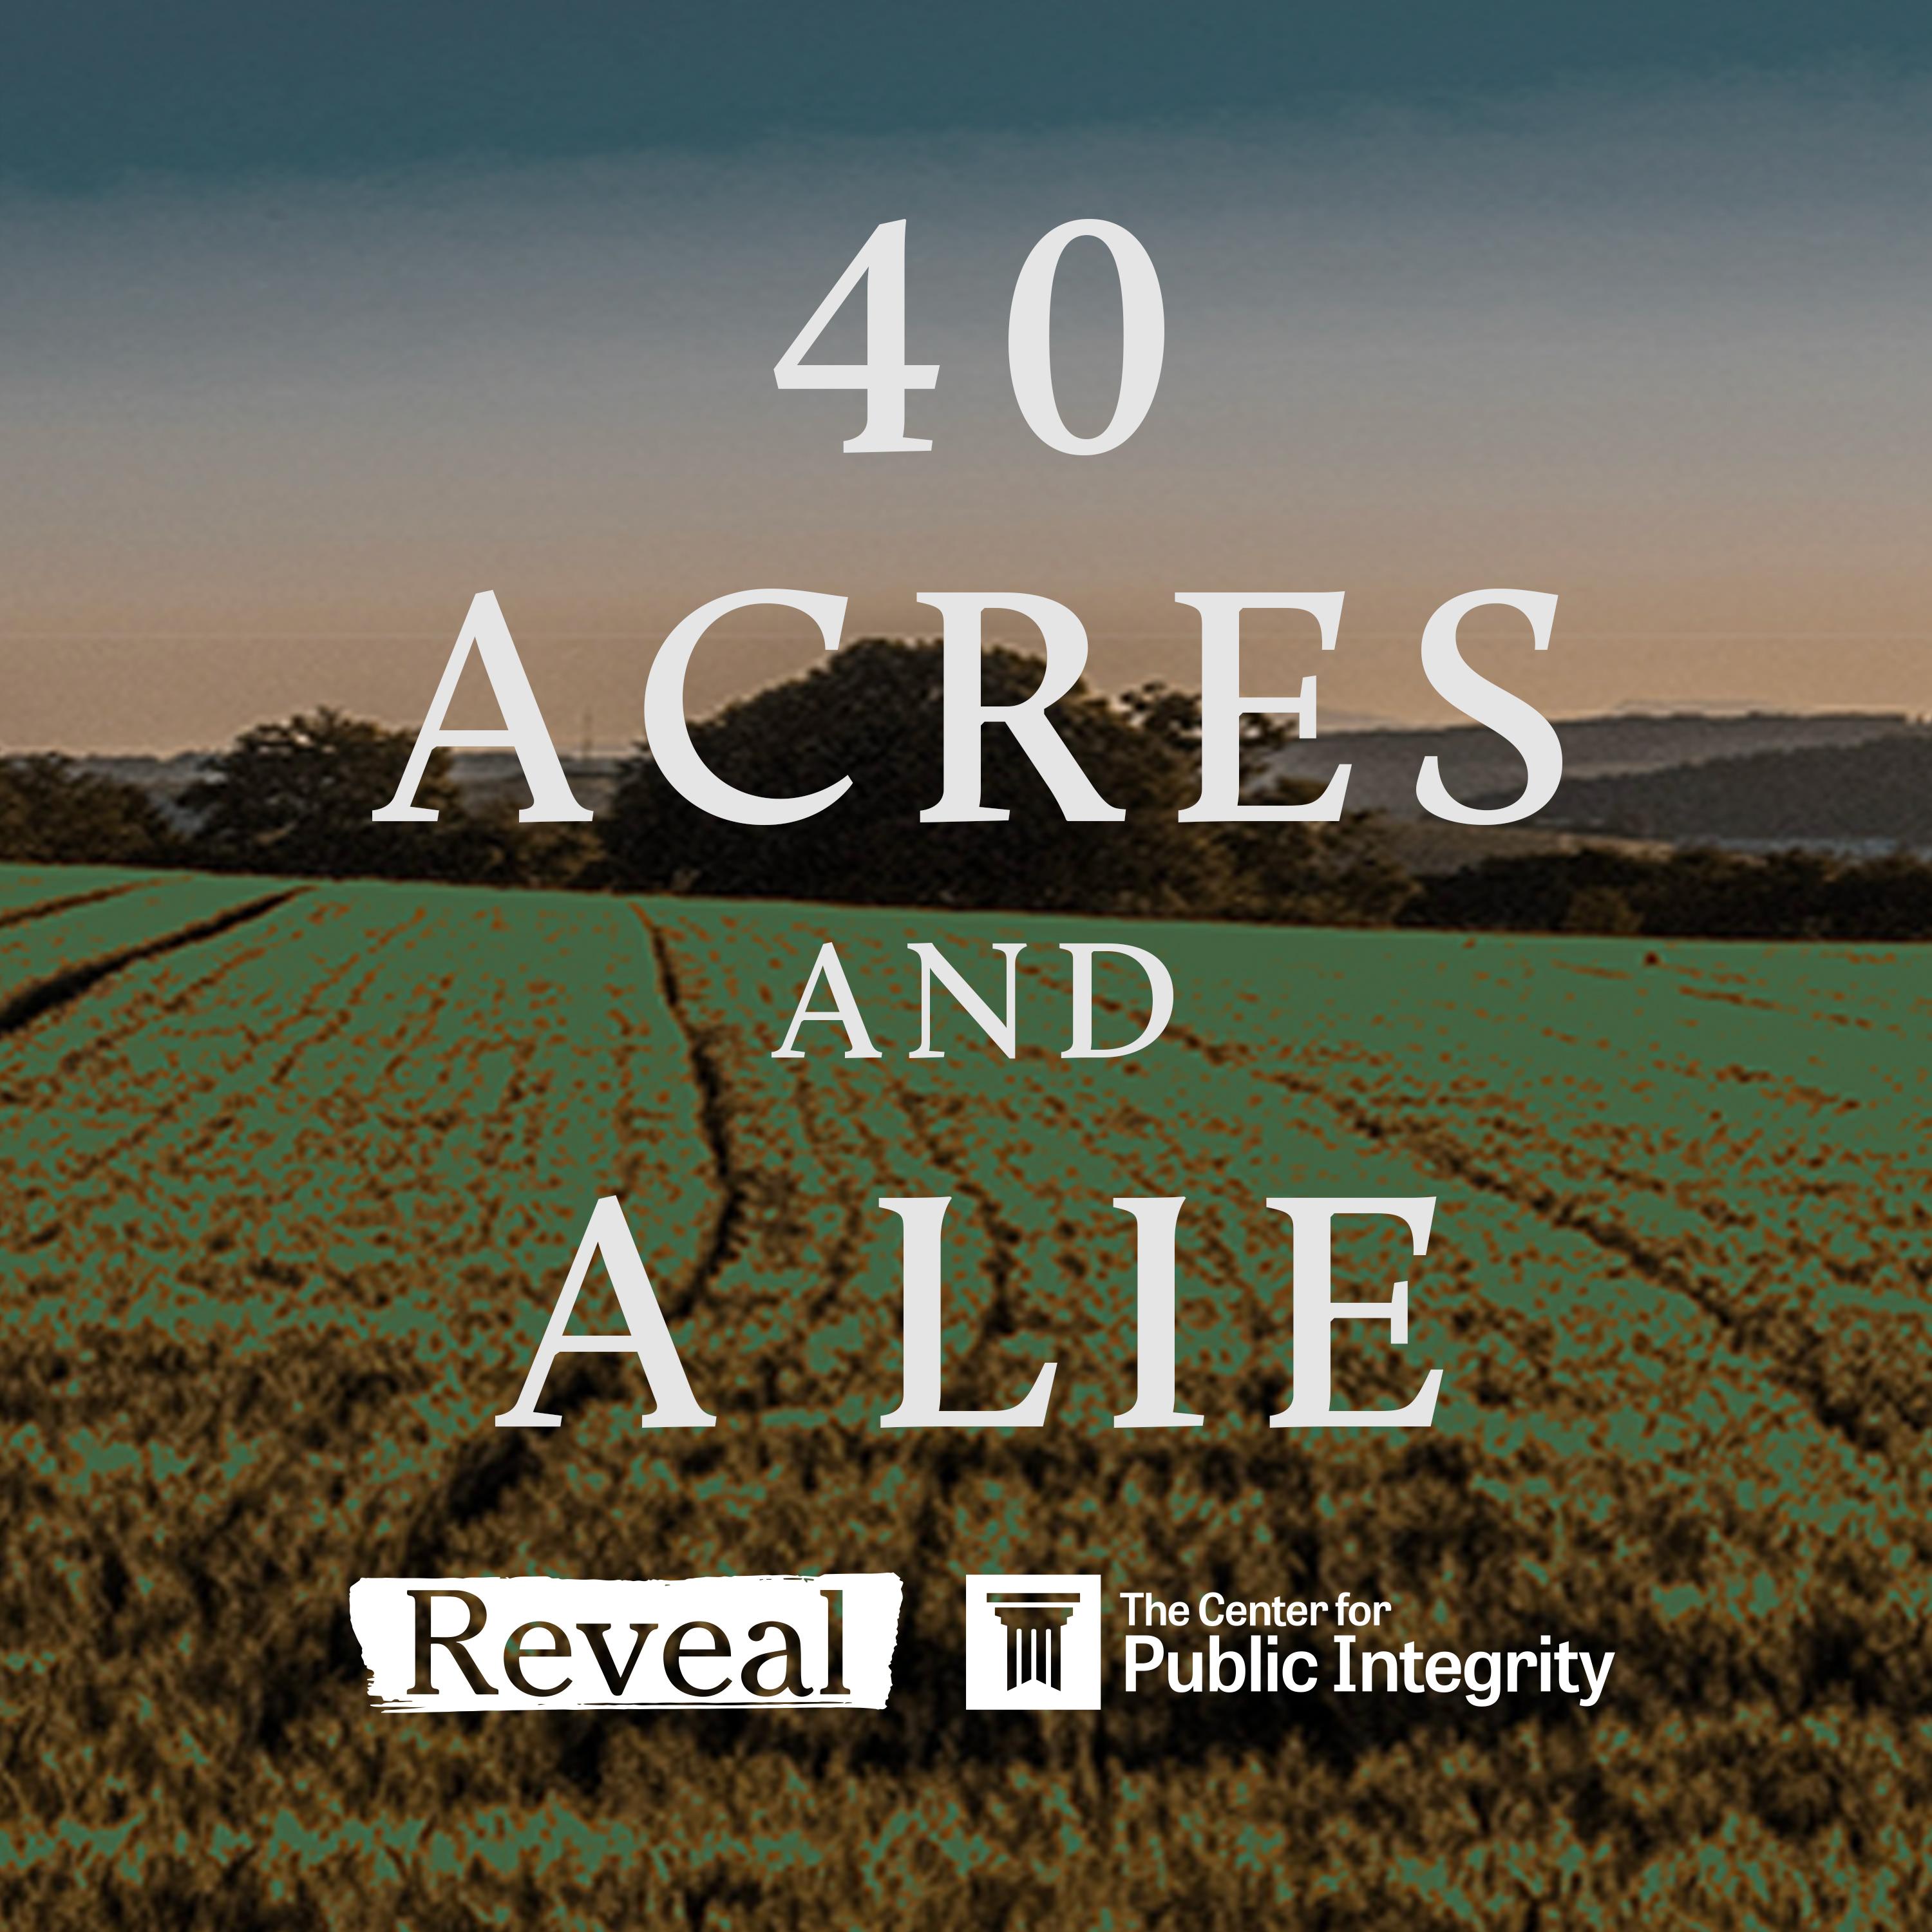 Thumbnail for "40 Acres and a Lie Part 2 ".